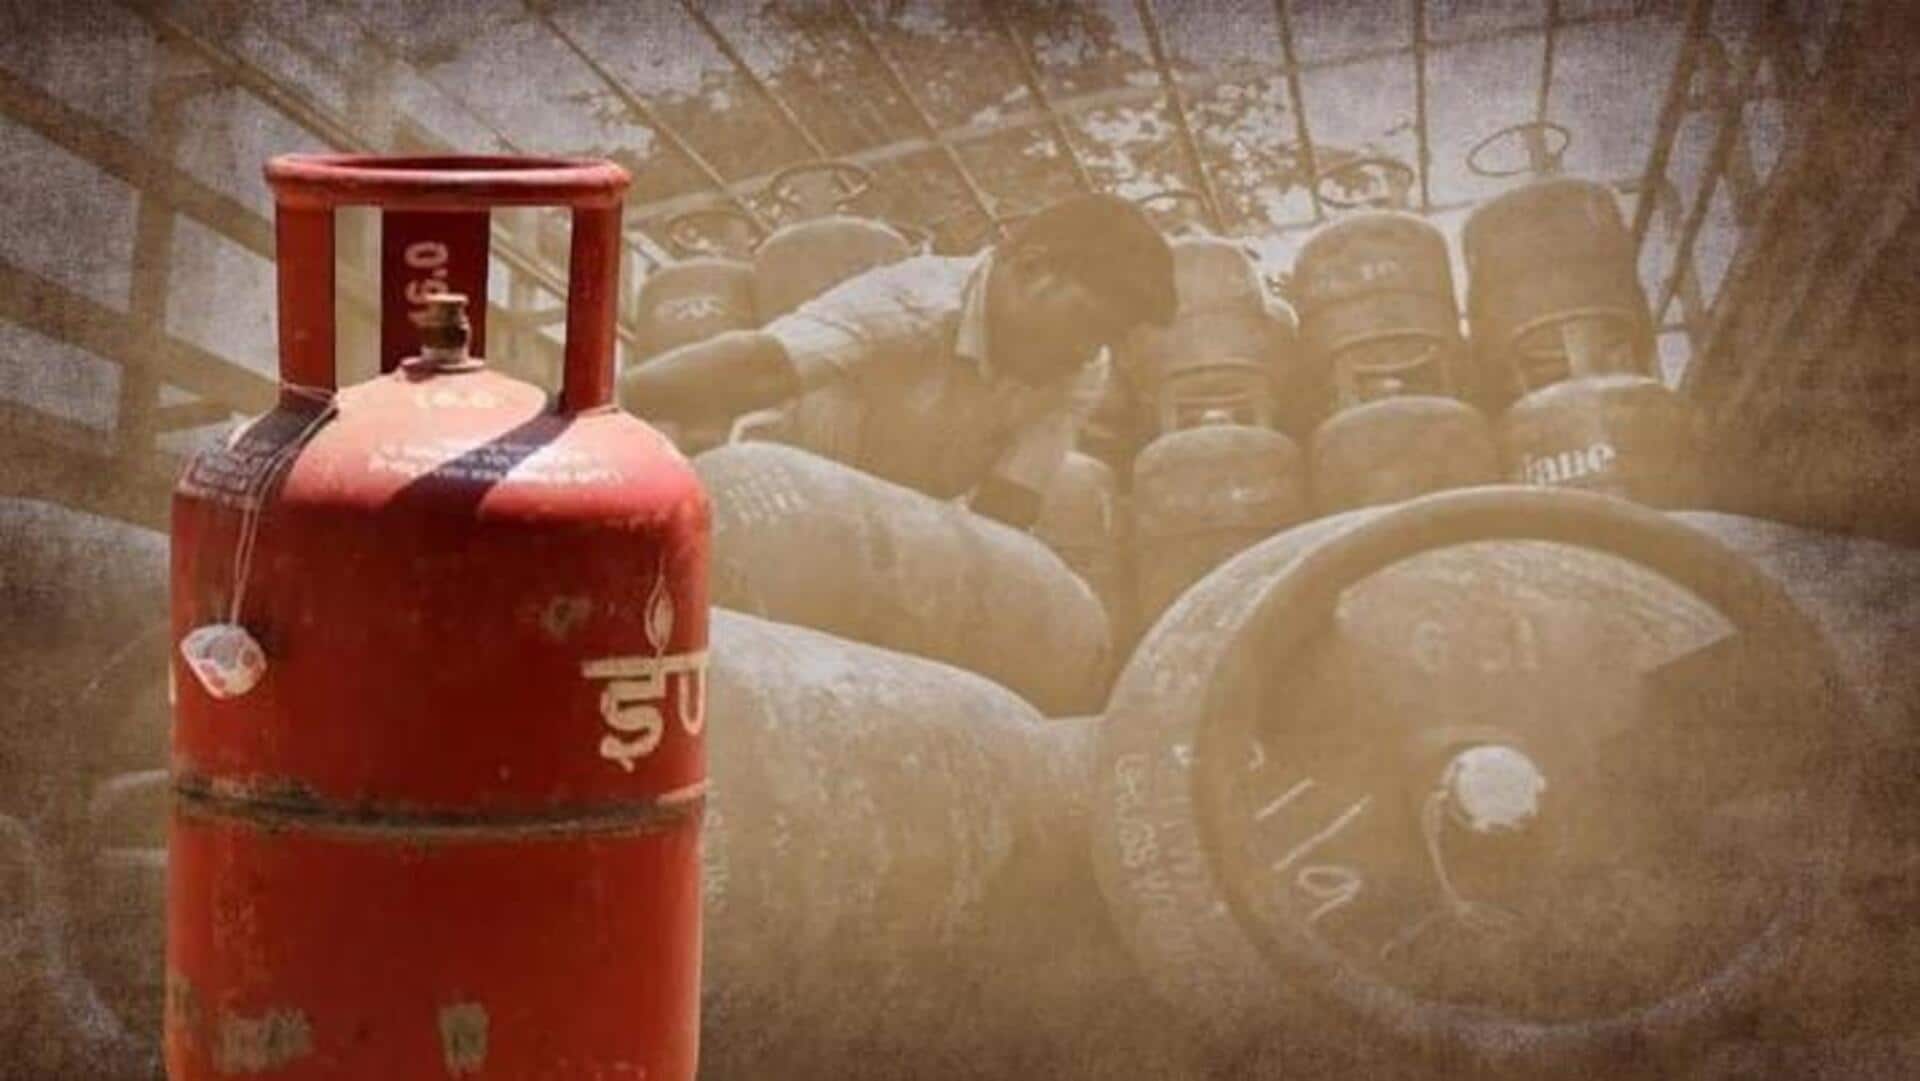 Commercial LPG cylinder price hiked by Rs. 209